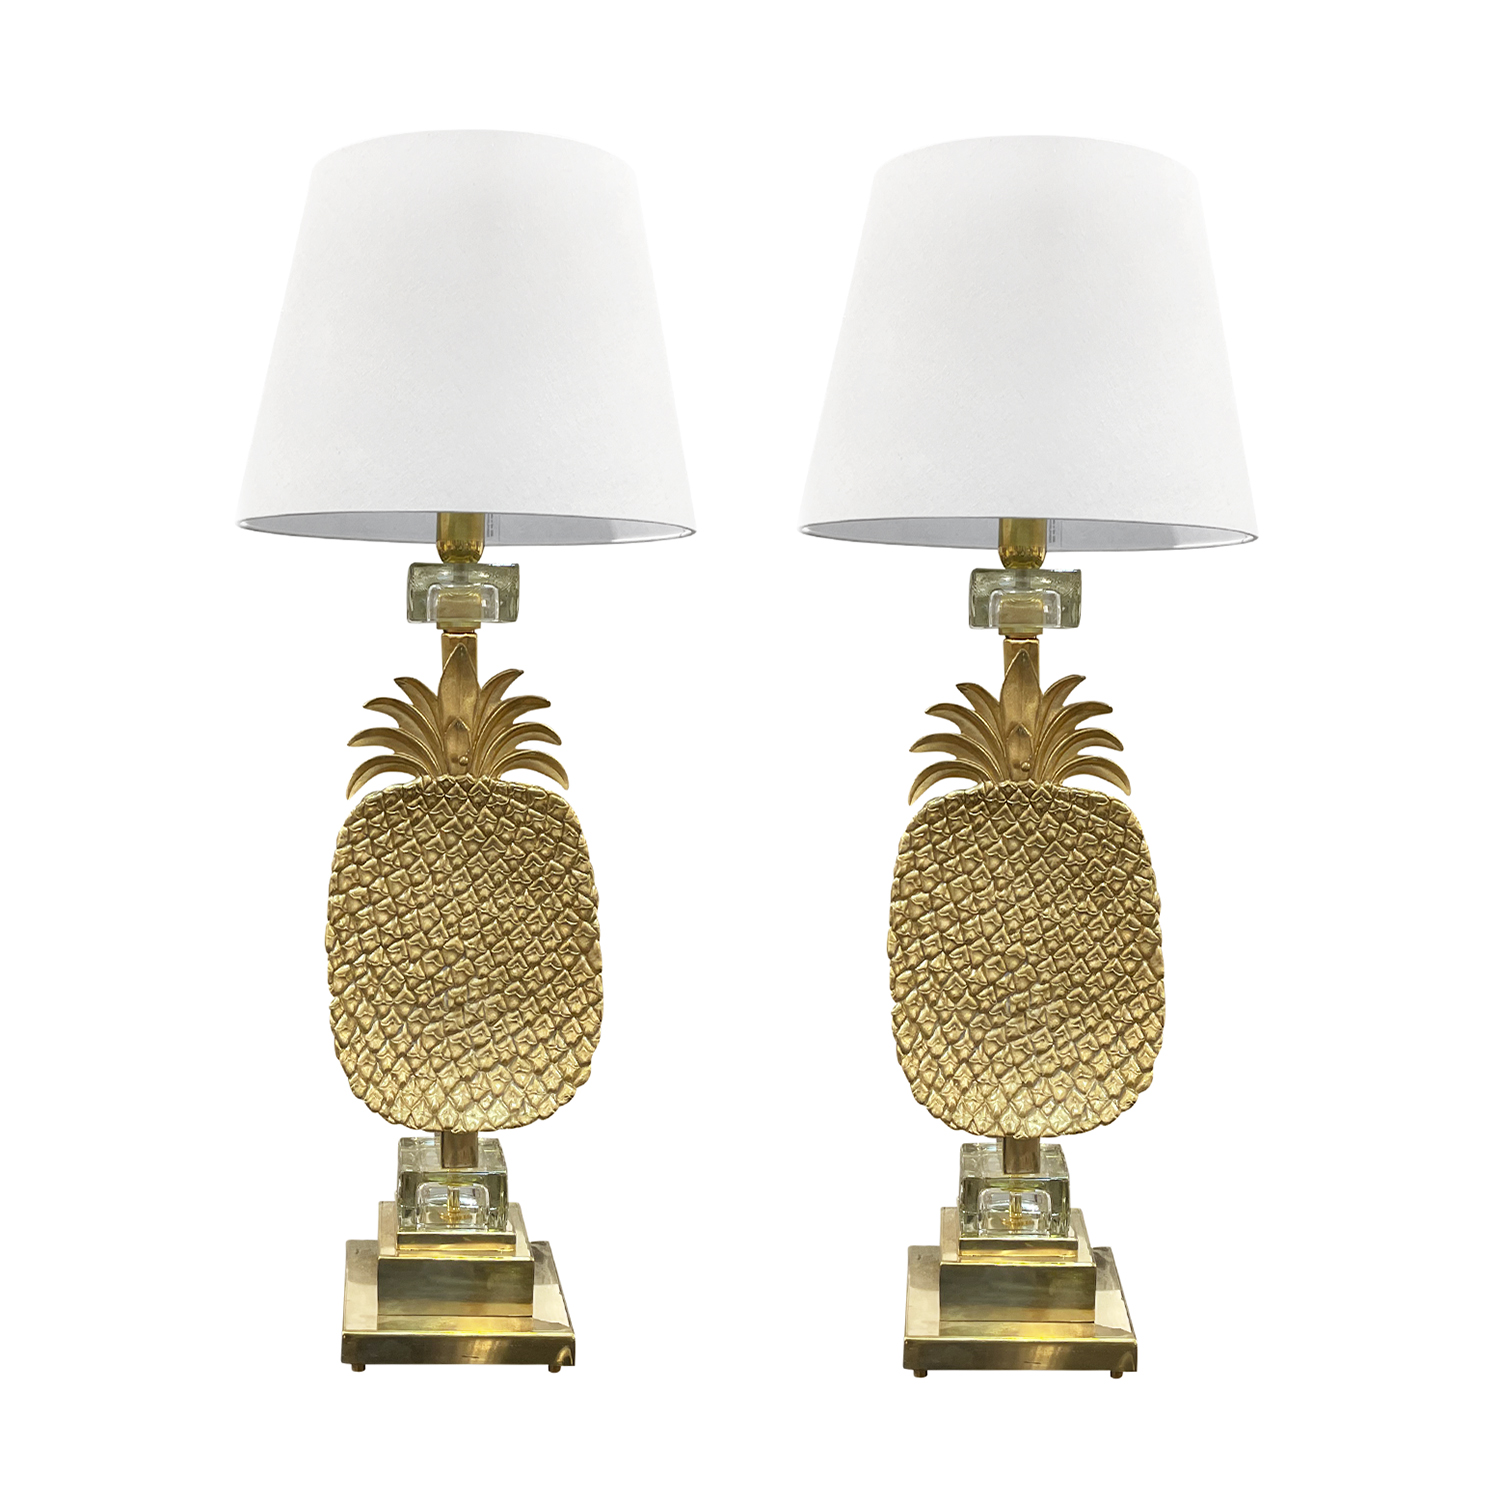 20th Century Italian Pair of Vintage Pineapple Murano Glass Table Lamps